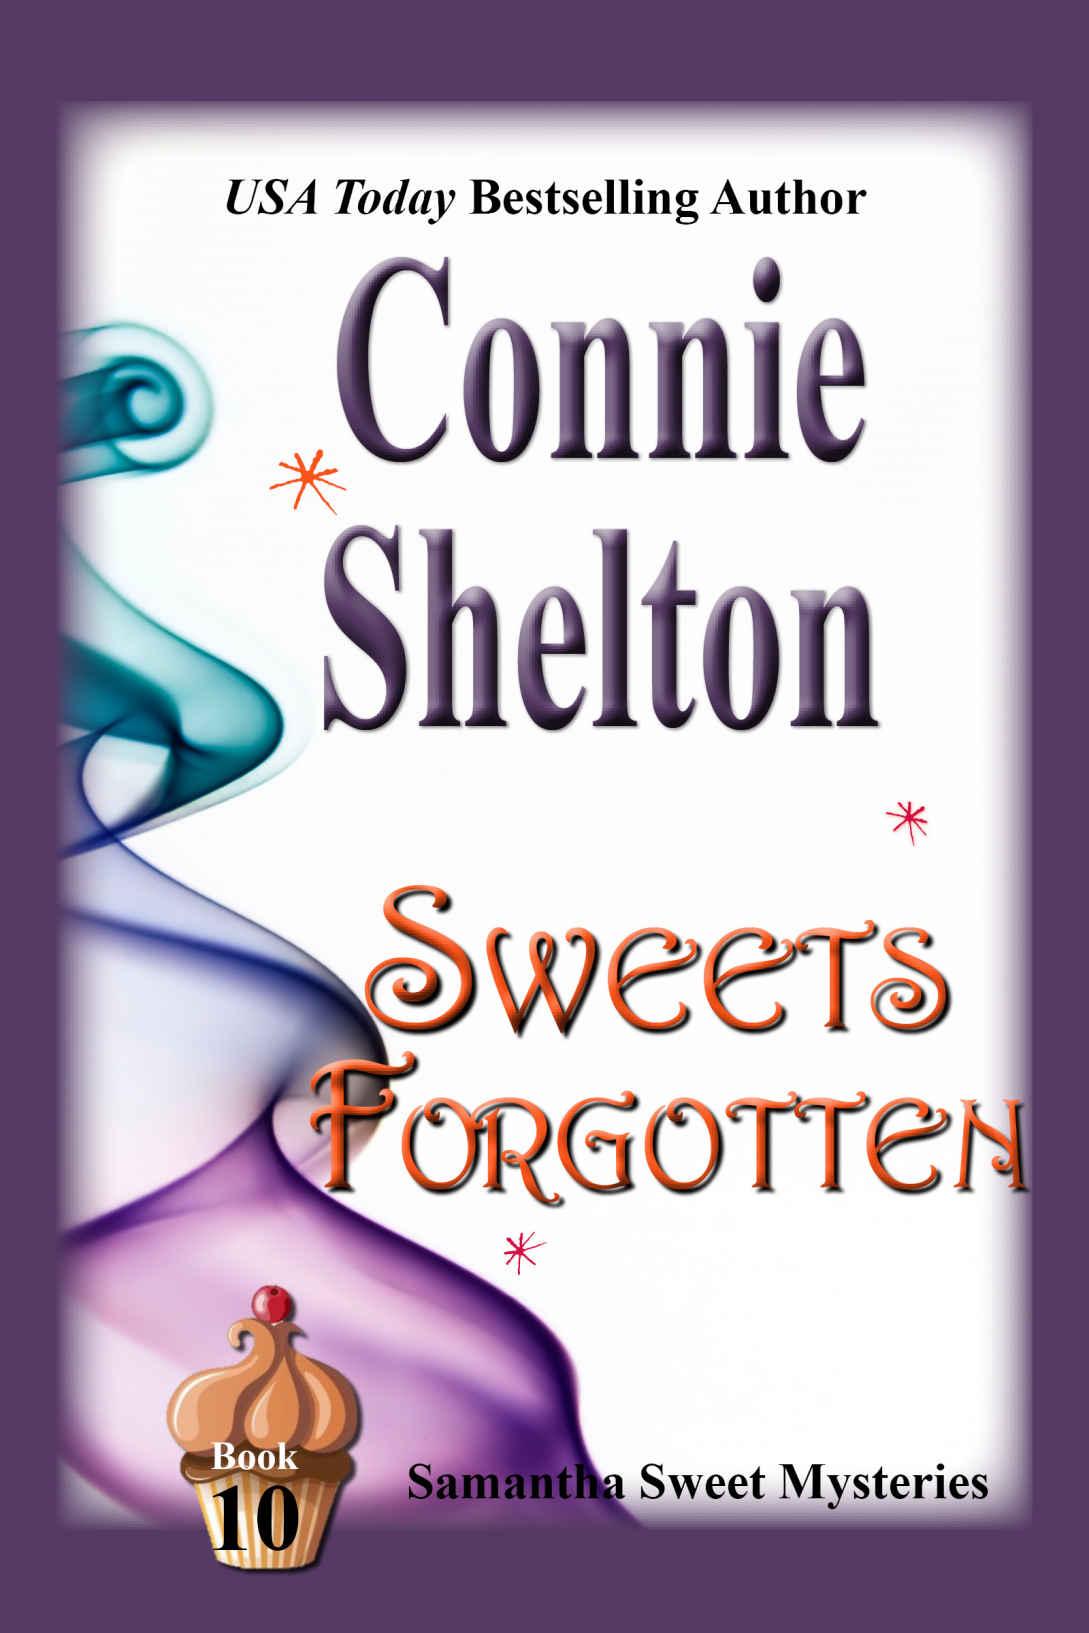 Sweets Forgotten (Samantha Sweet Mysteries Book 10) by Connie Shelton